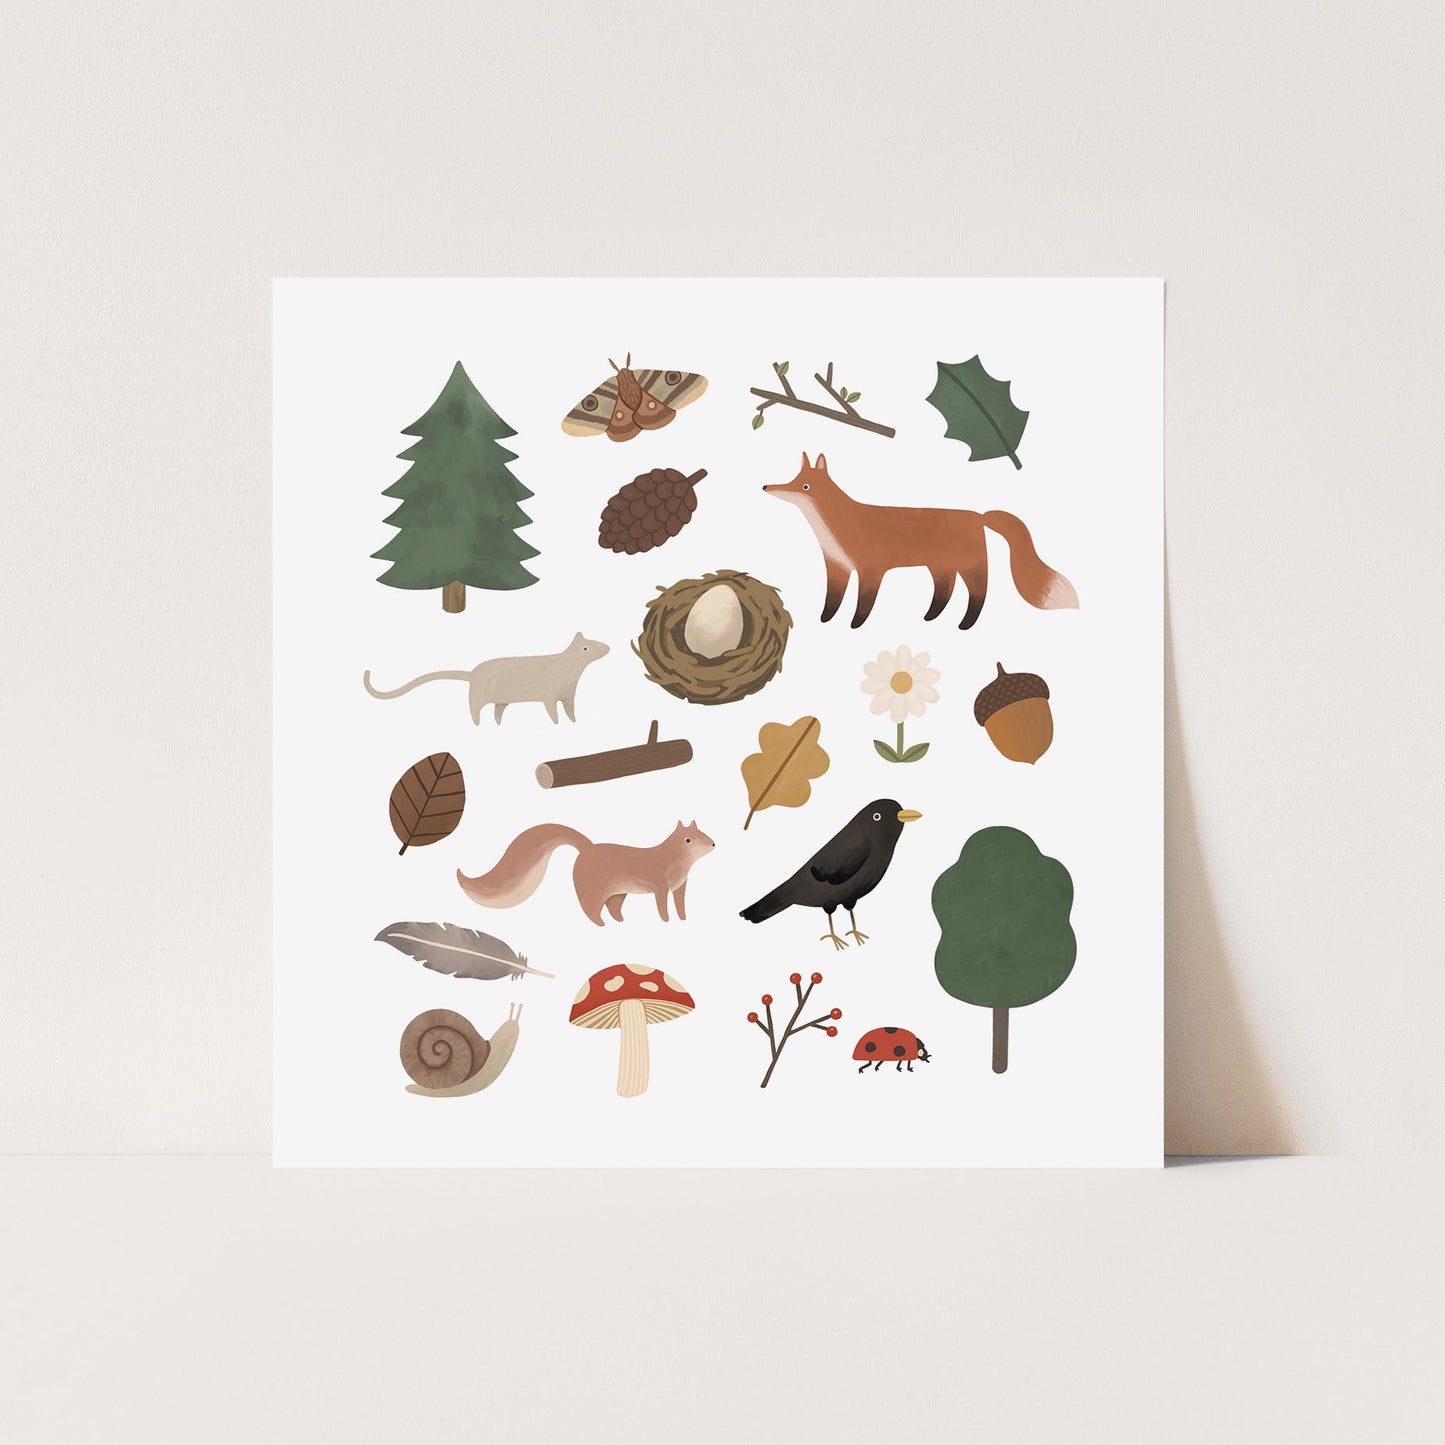 Woodland Life Art Print by Kid of the Village (2 Sizes Available)